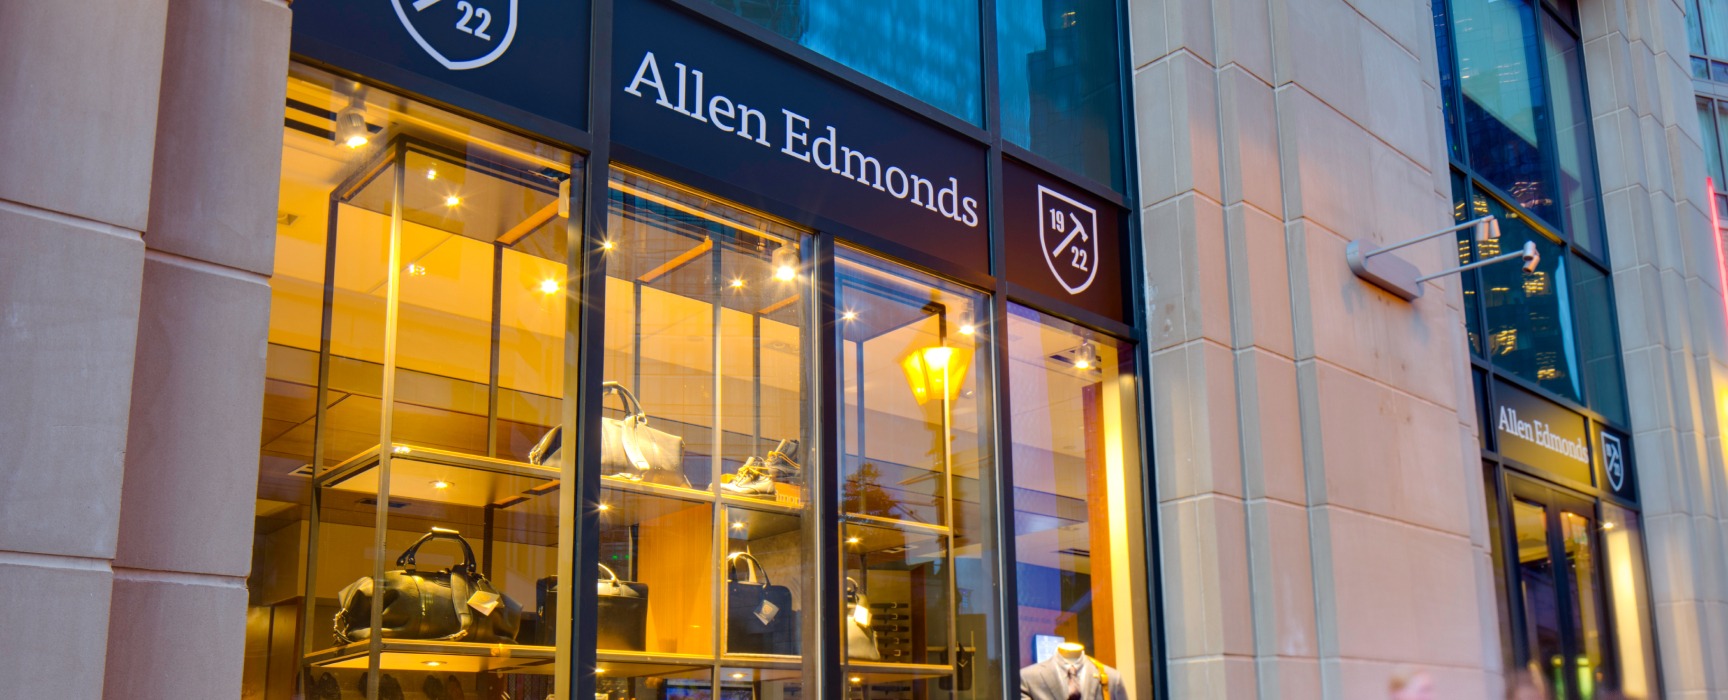 Allen Edmonds storefront, featuring several travel bags and upscale suits at twilight